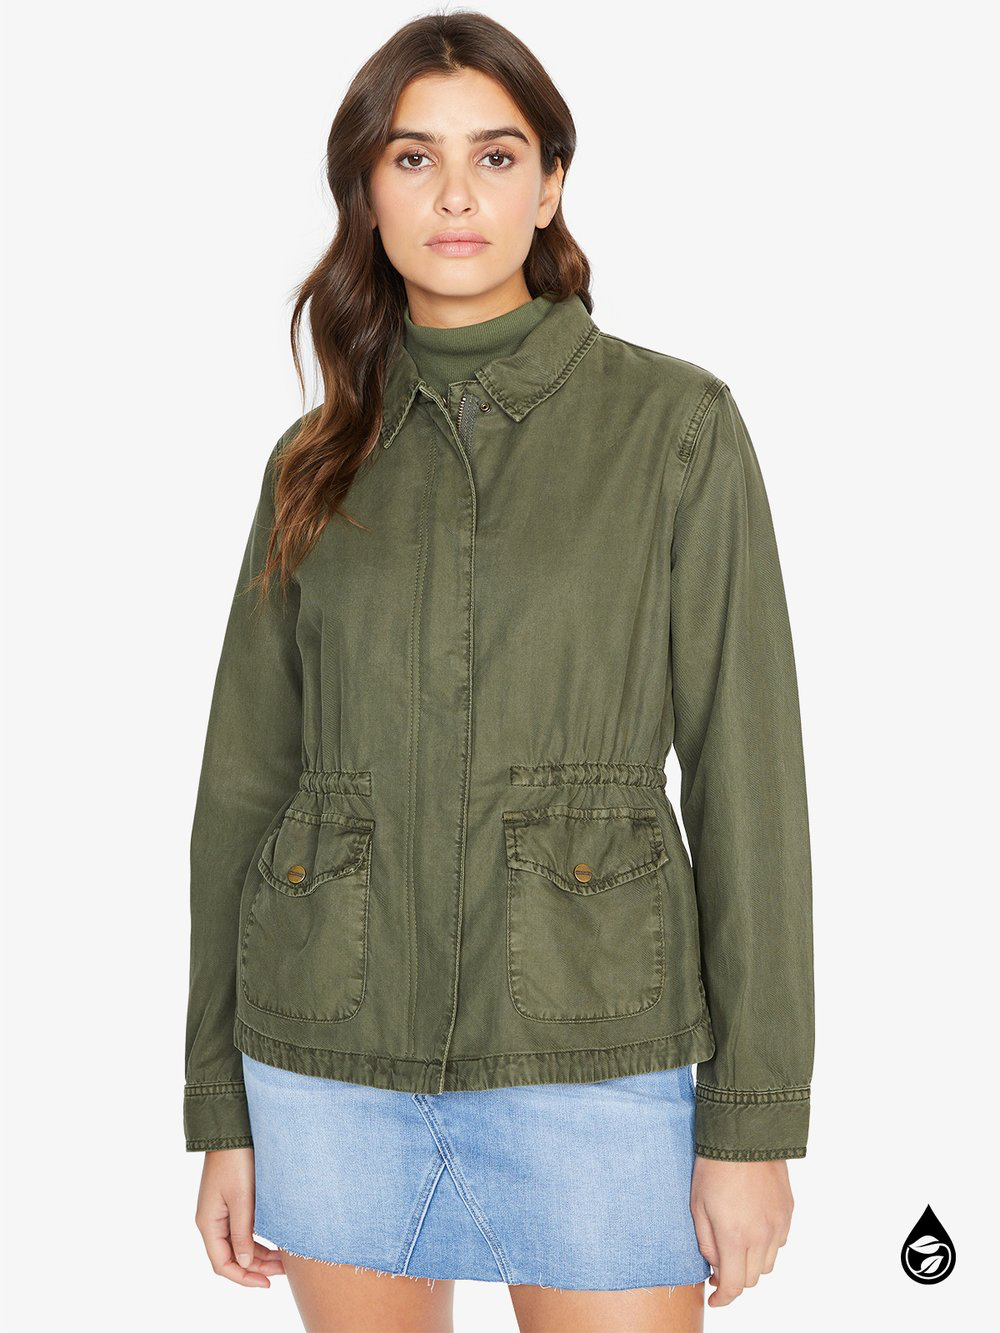 Liberty Military Jacket Army Green - Kingfisher Road - Online Boutique